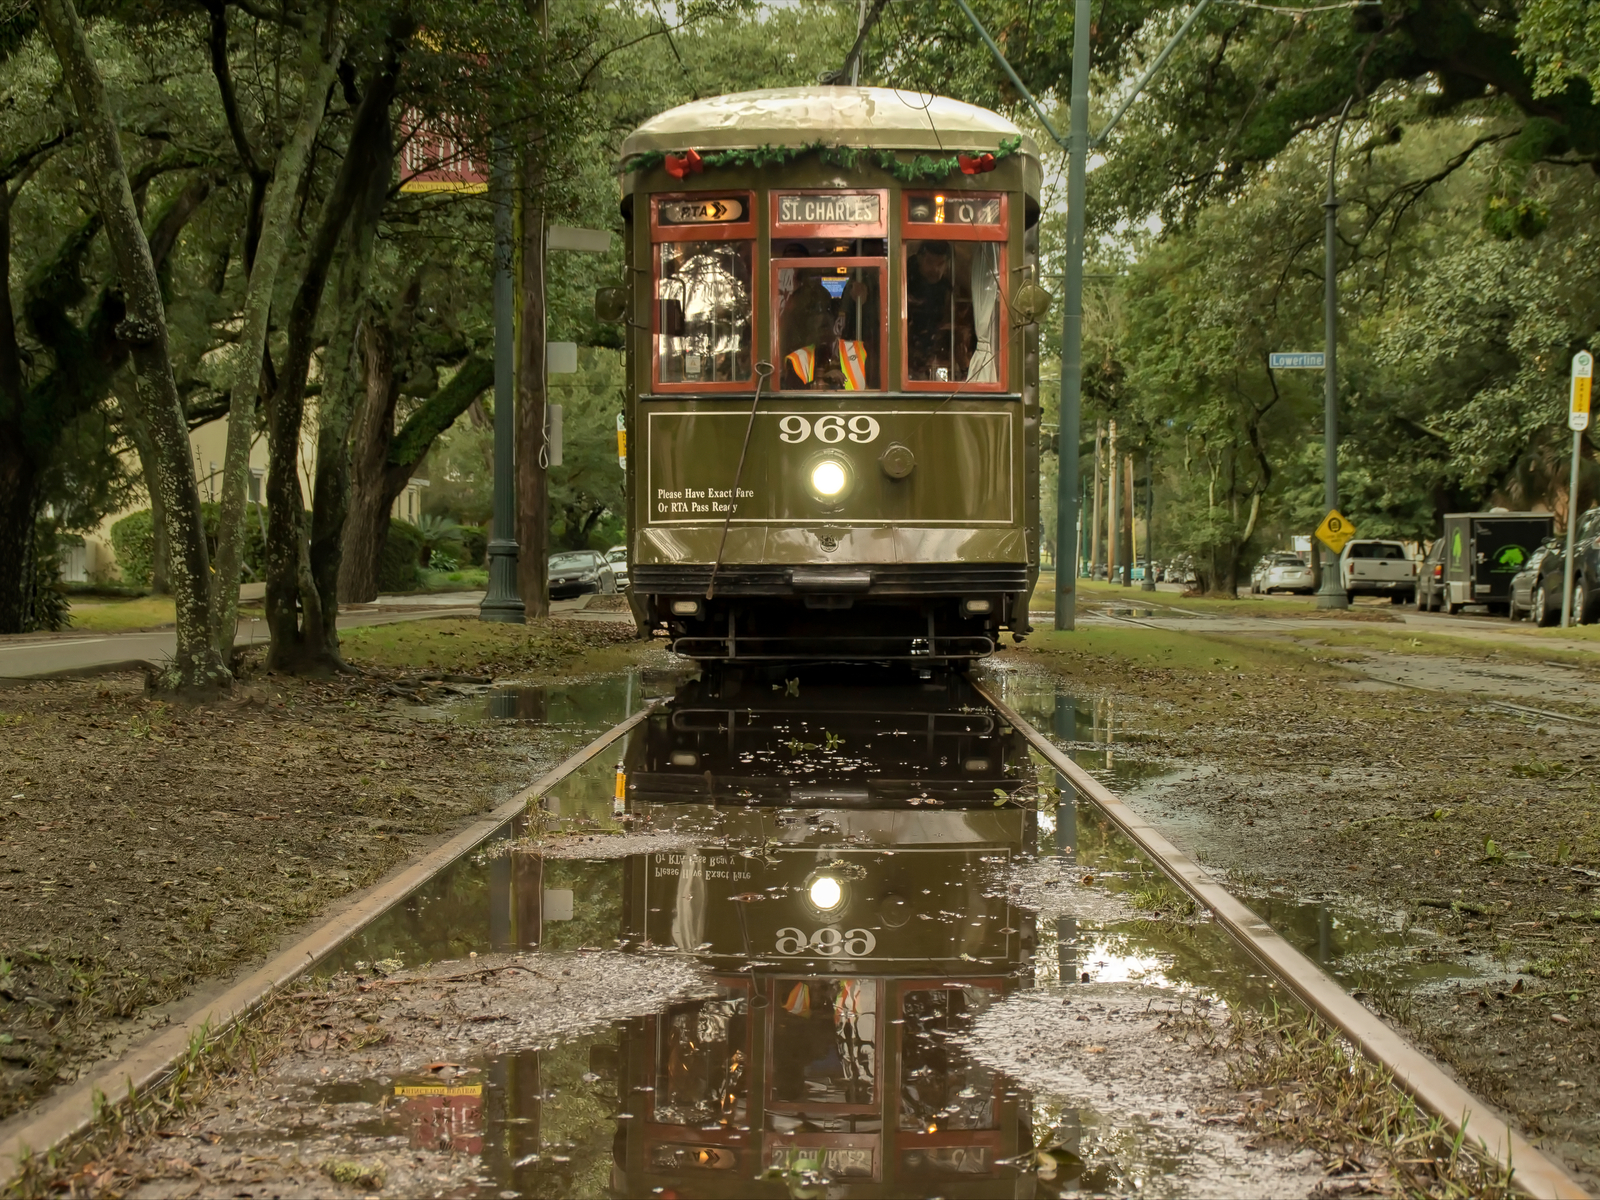 Streetcar pictured on a rainy day during the worst time to visit New Orleans